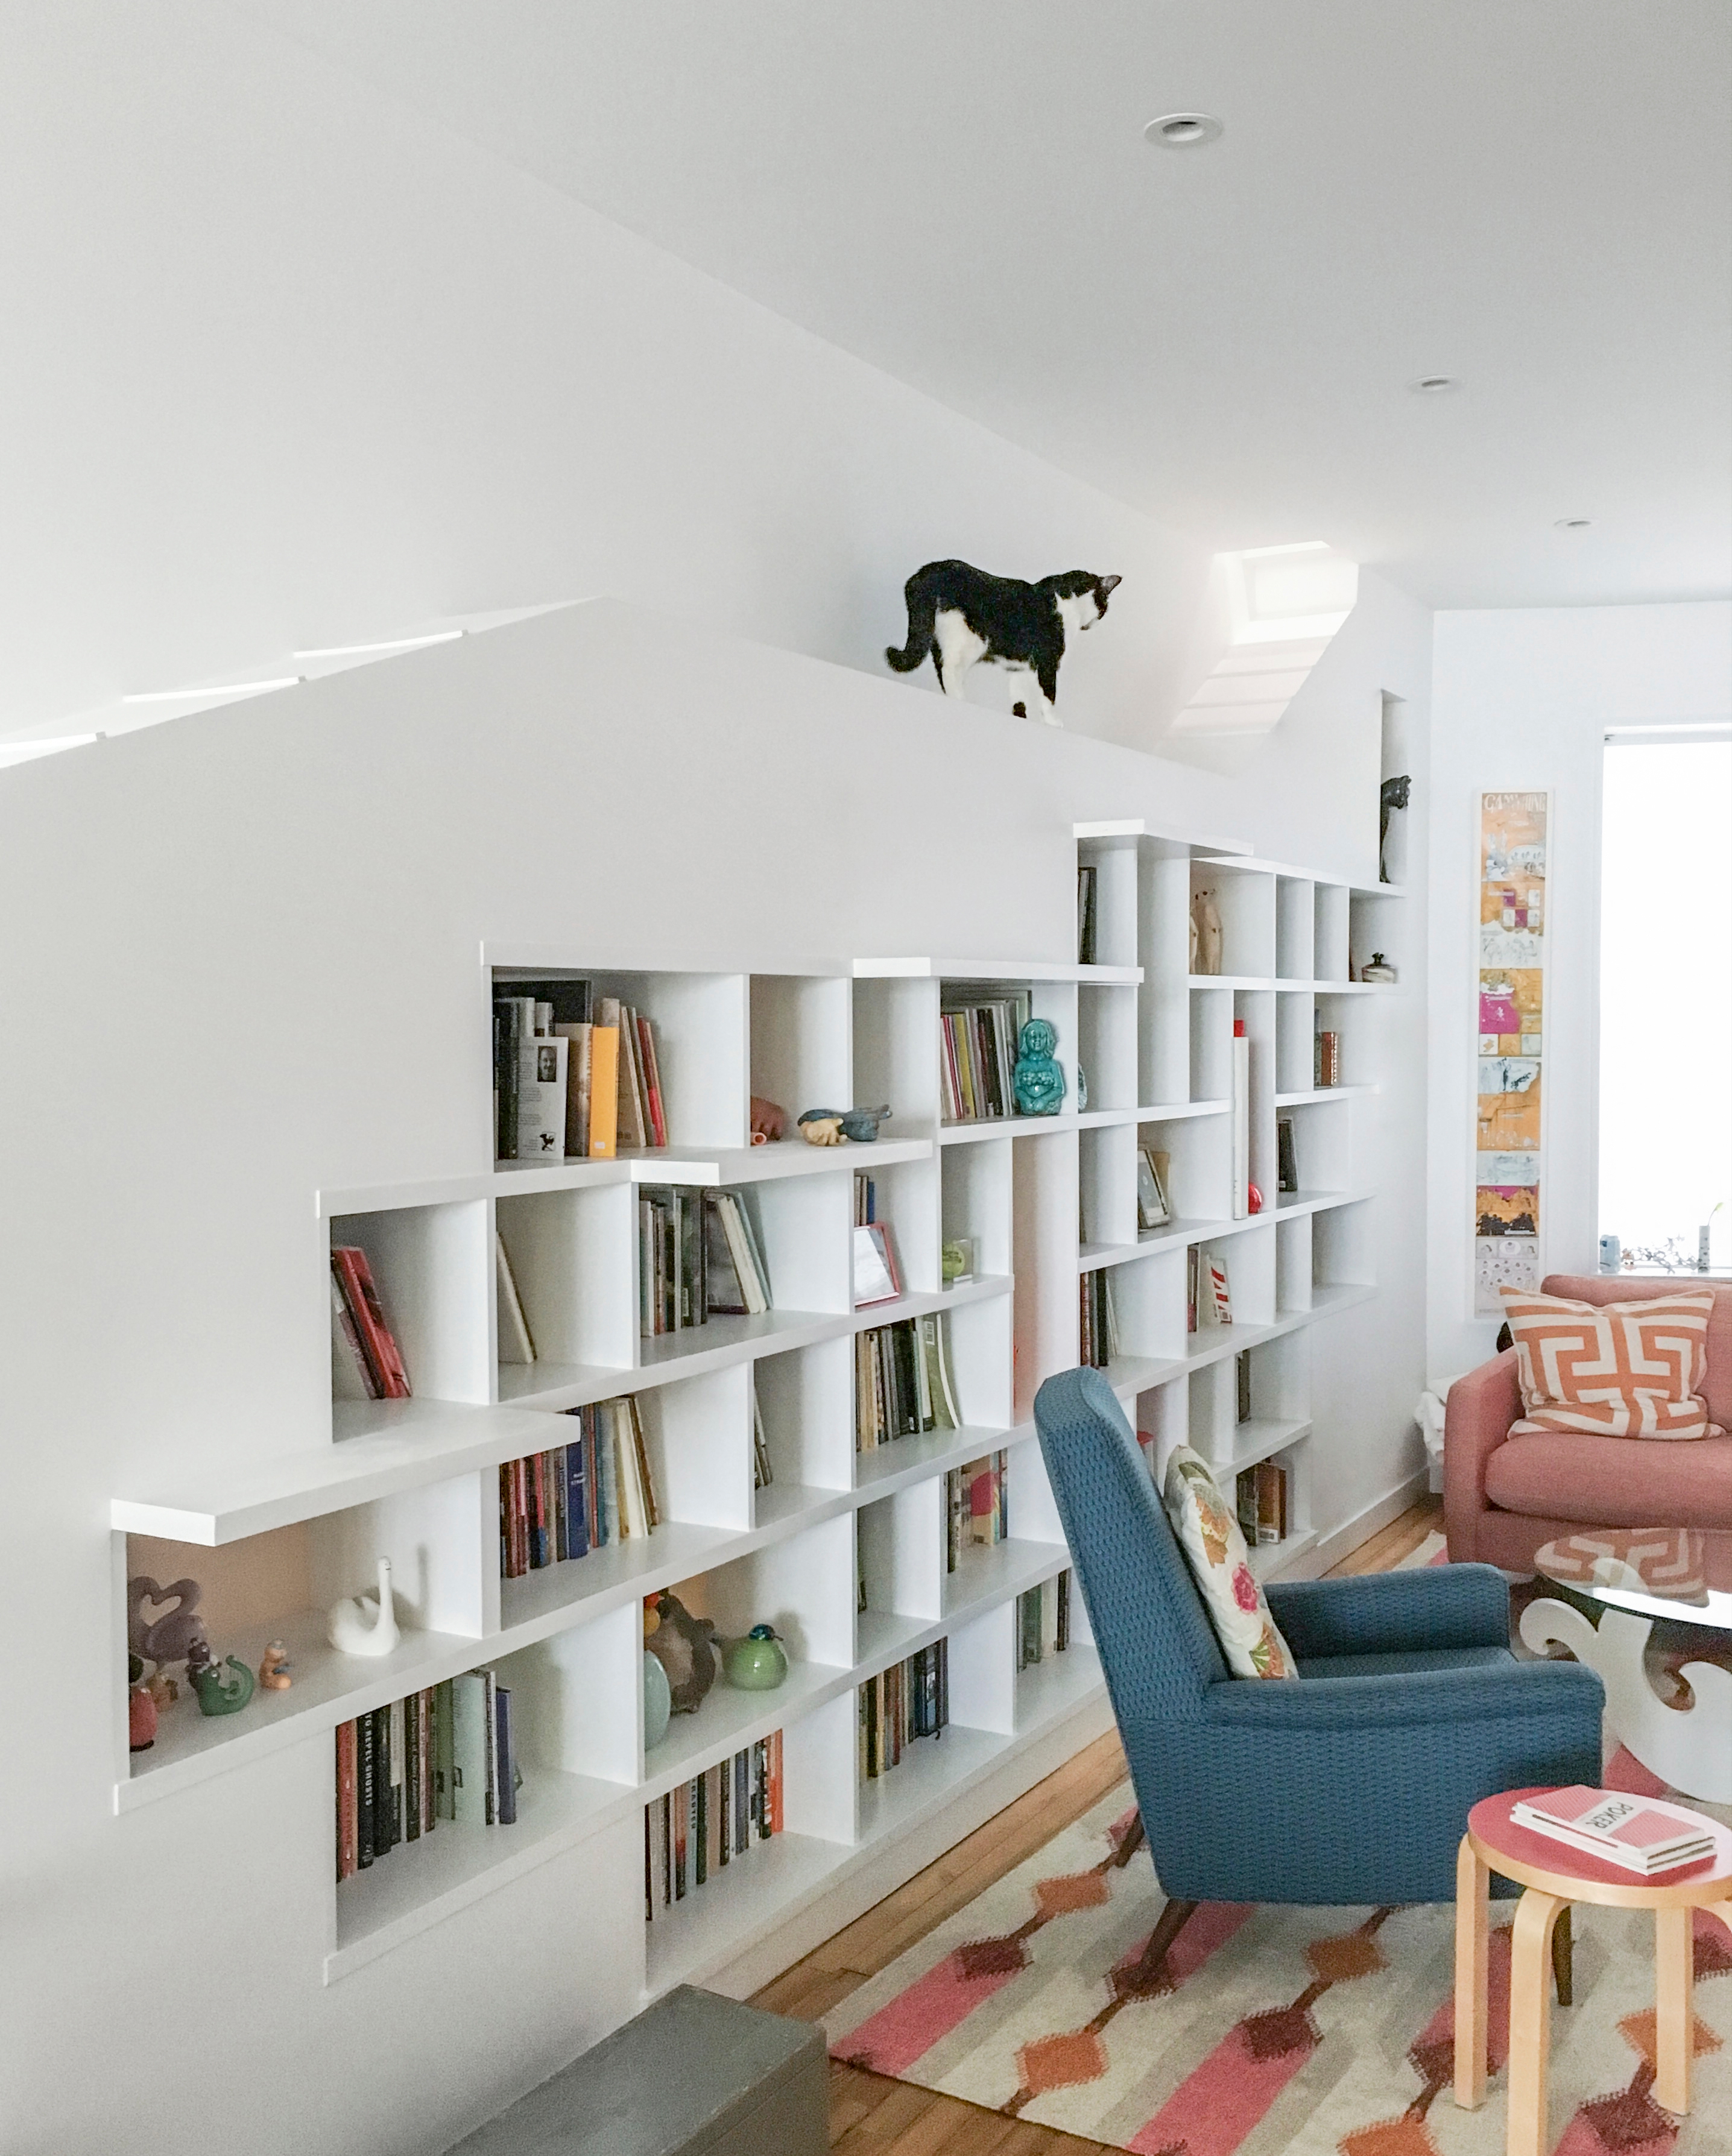 House for Booklovers & Cats in Brooklyn, New York by BFDO Architects